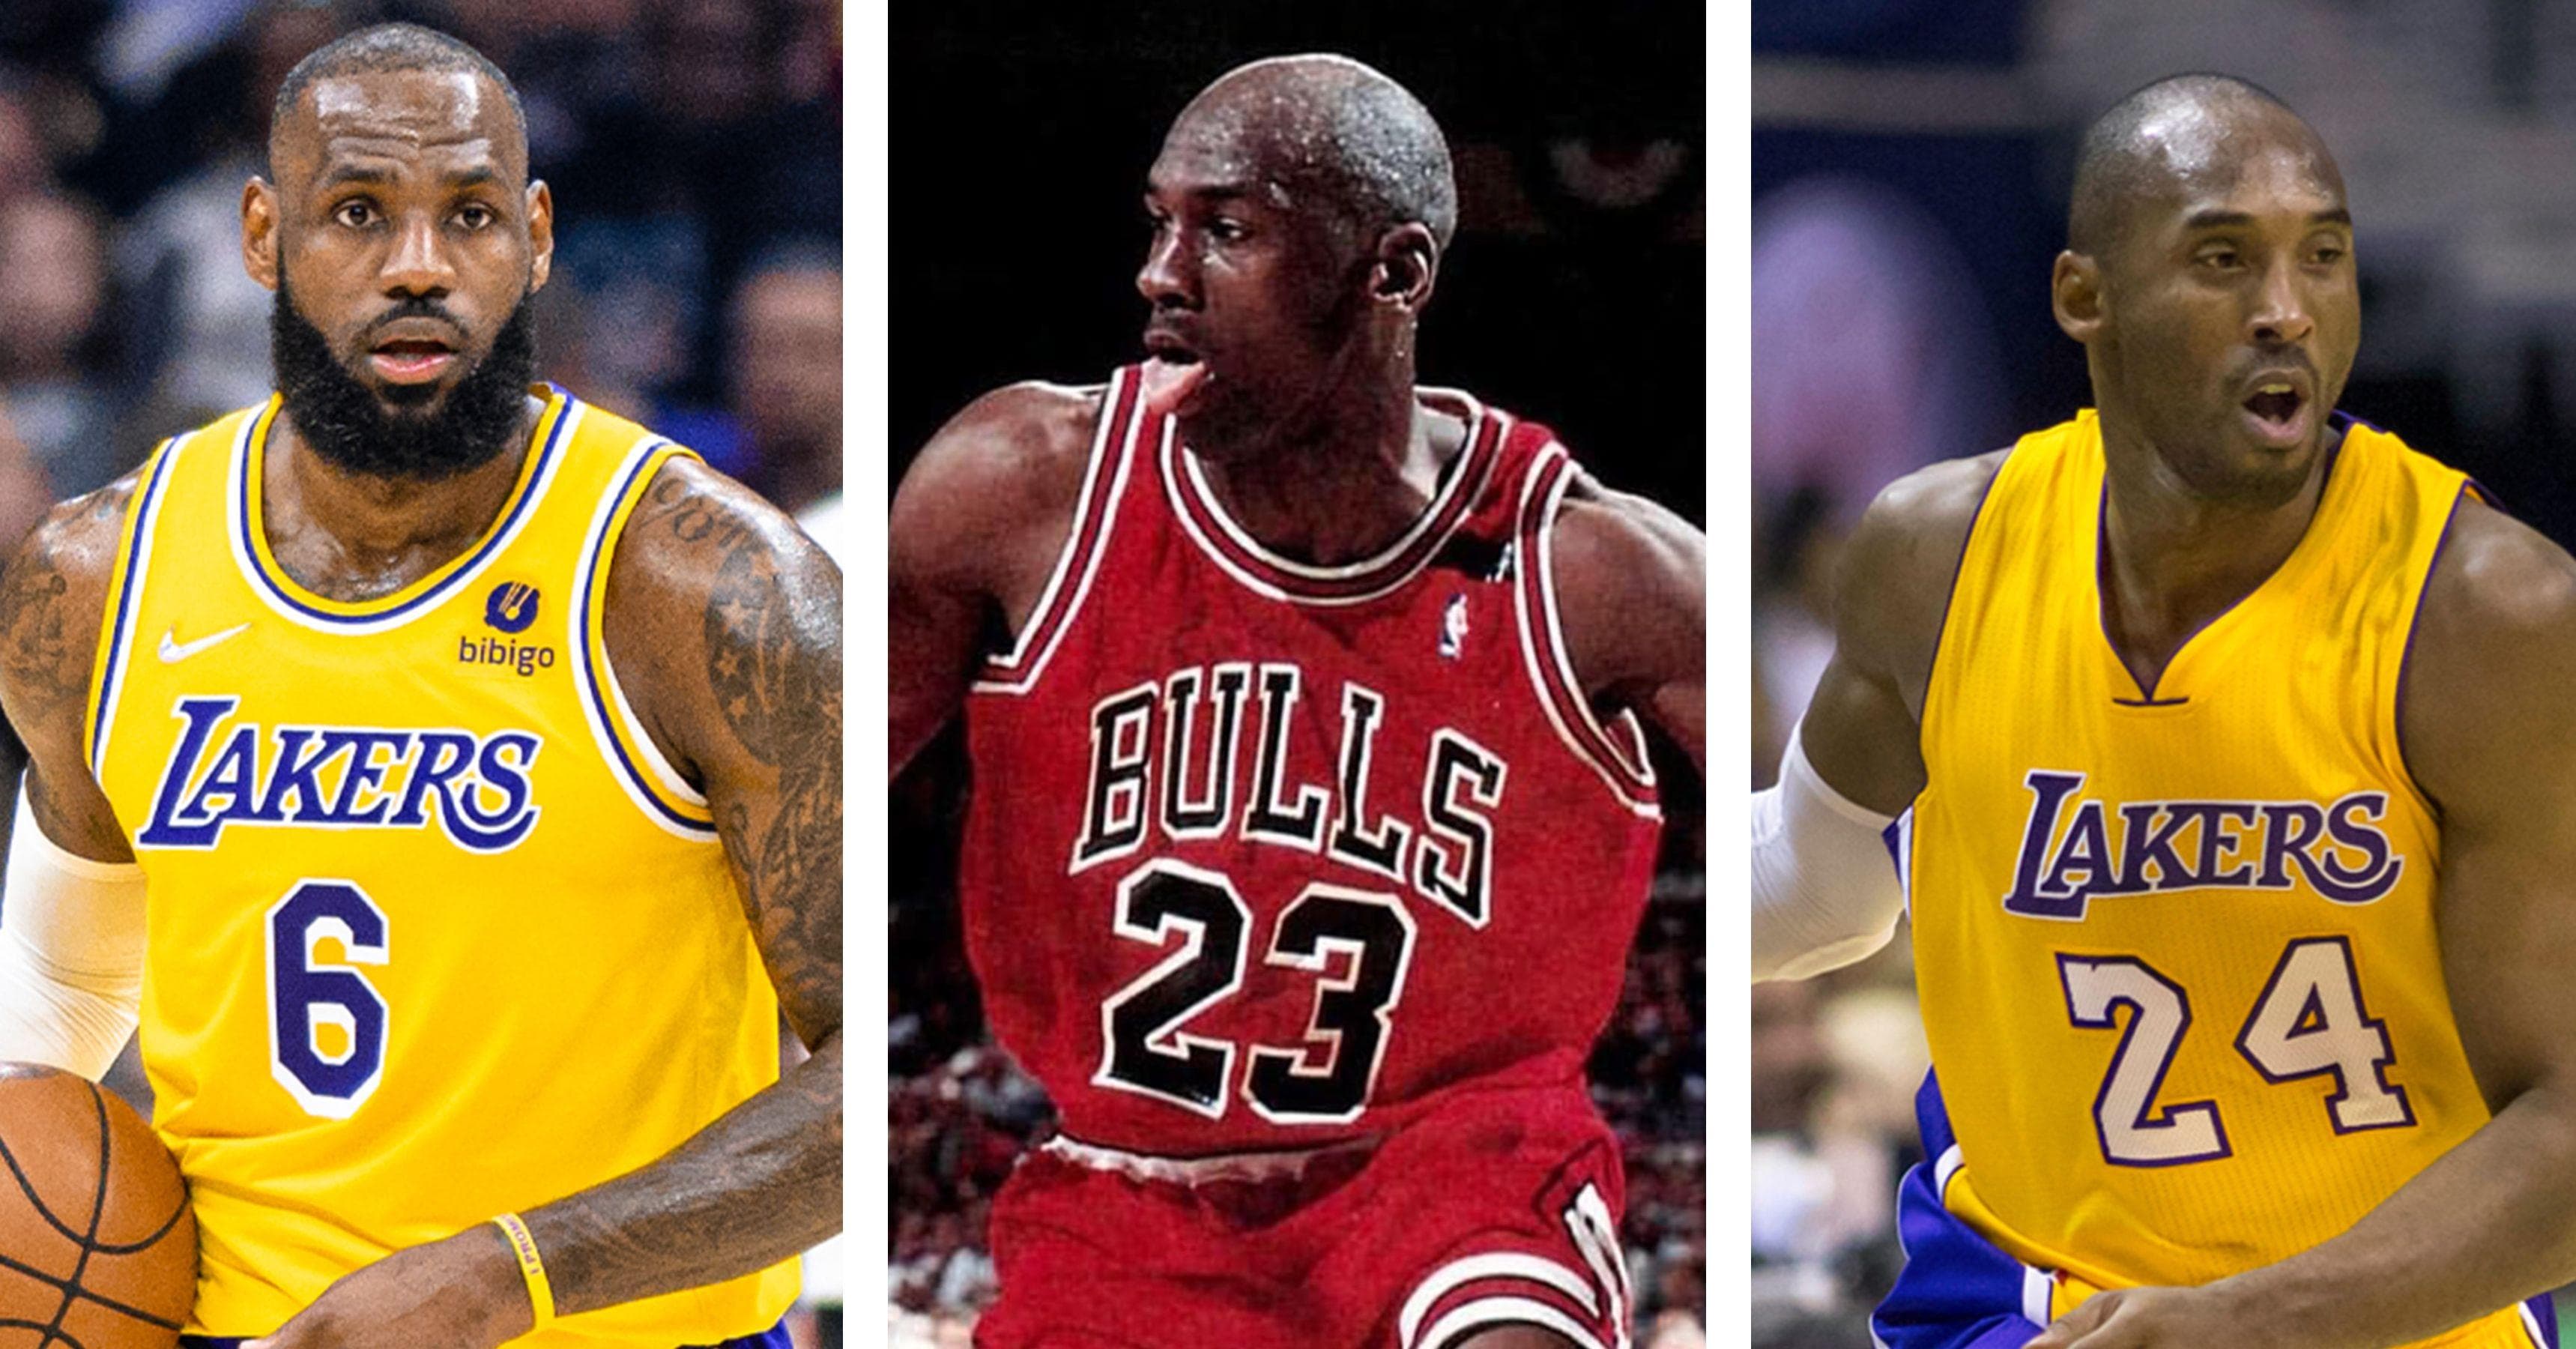 Top 100 Greatest NBA Players of All Time 